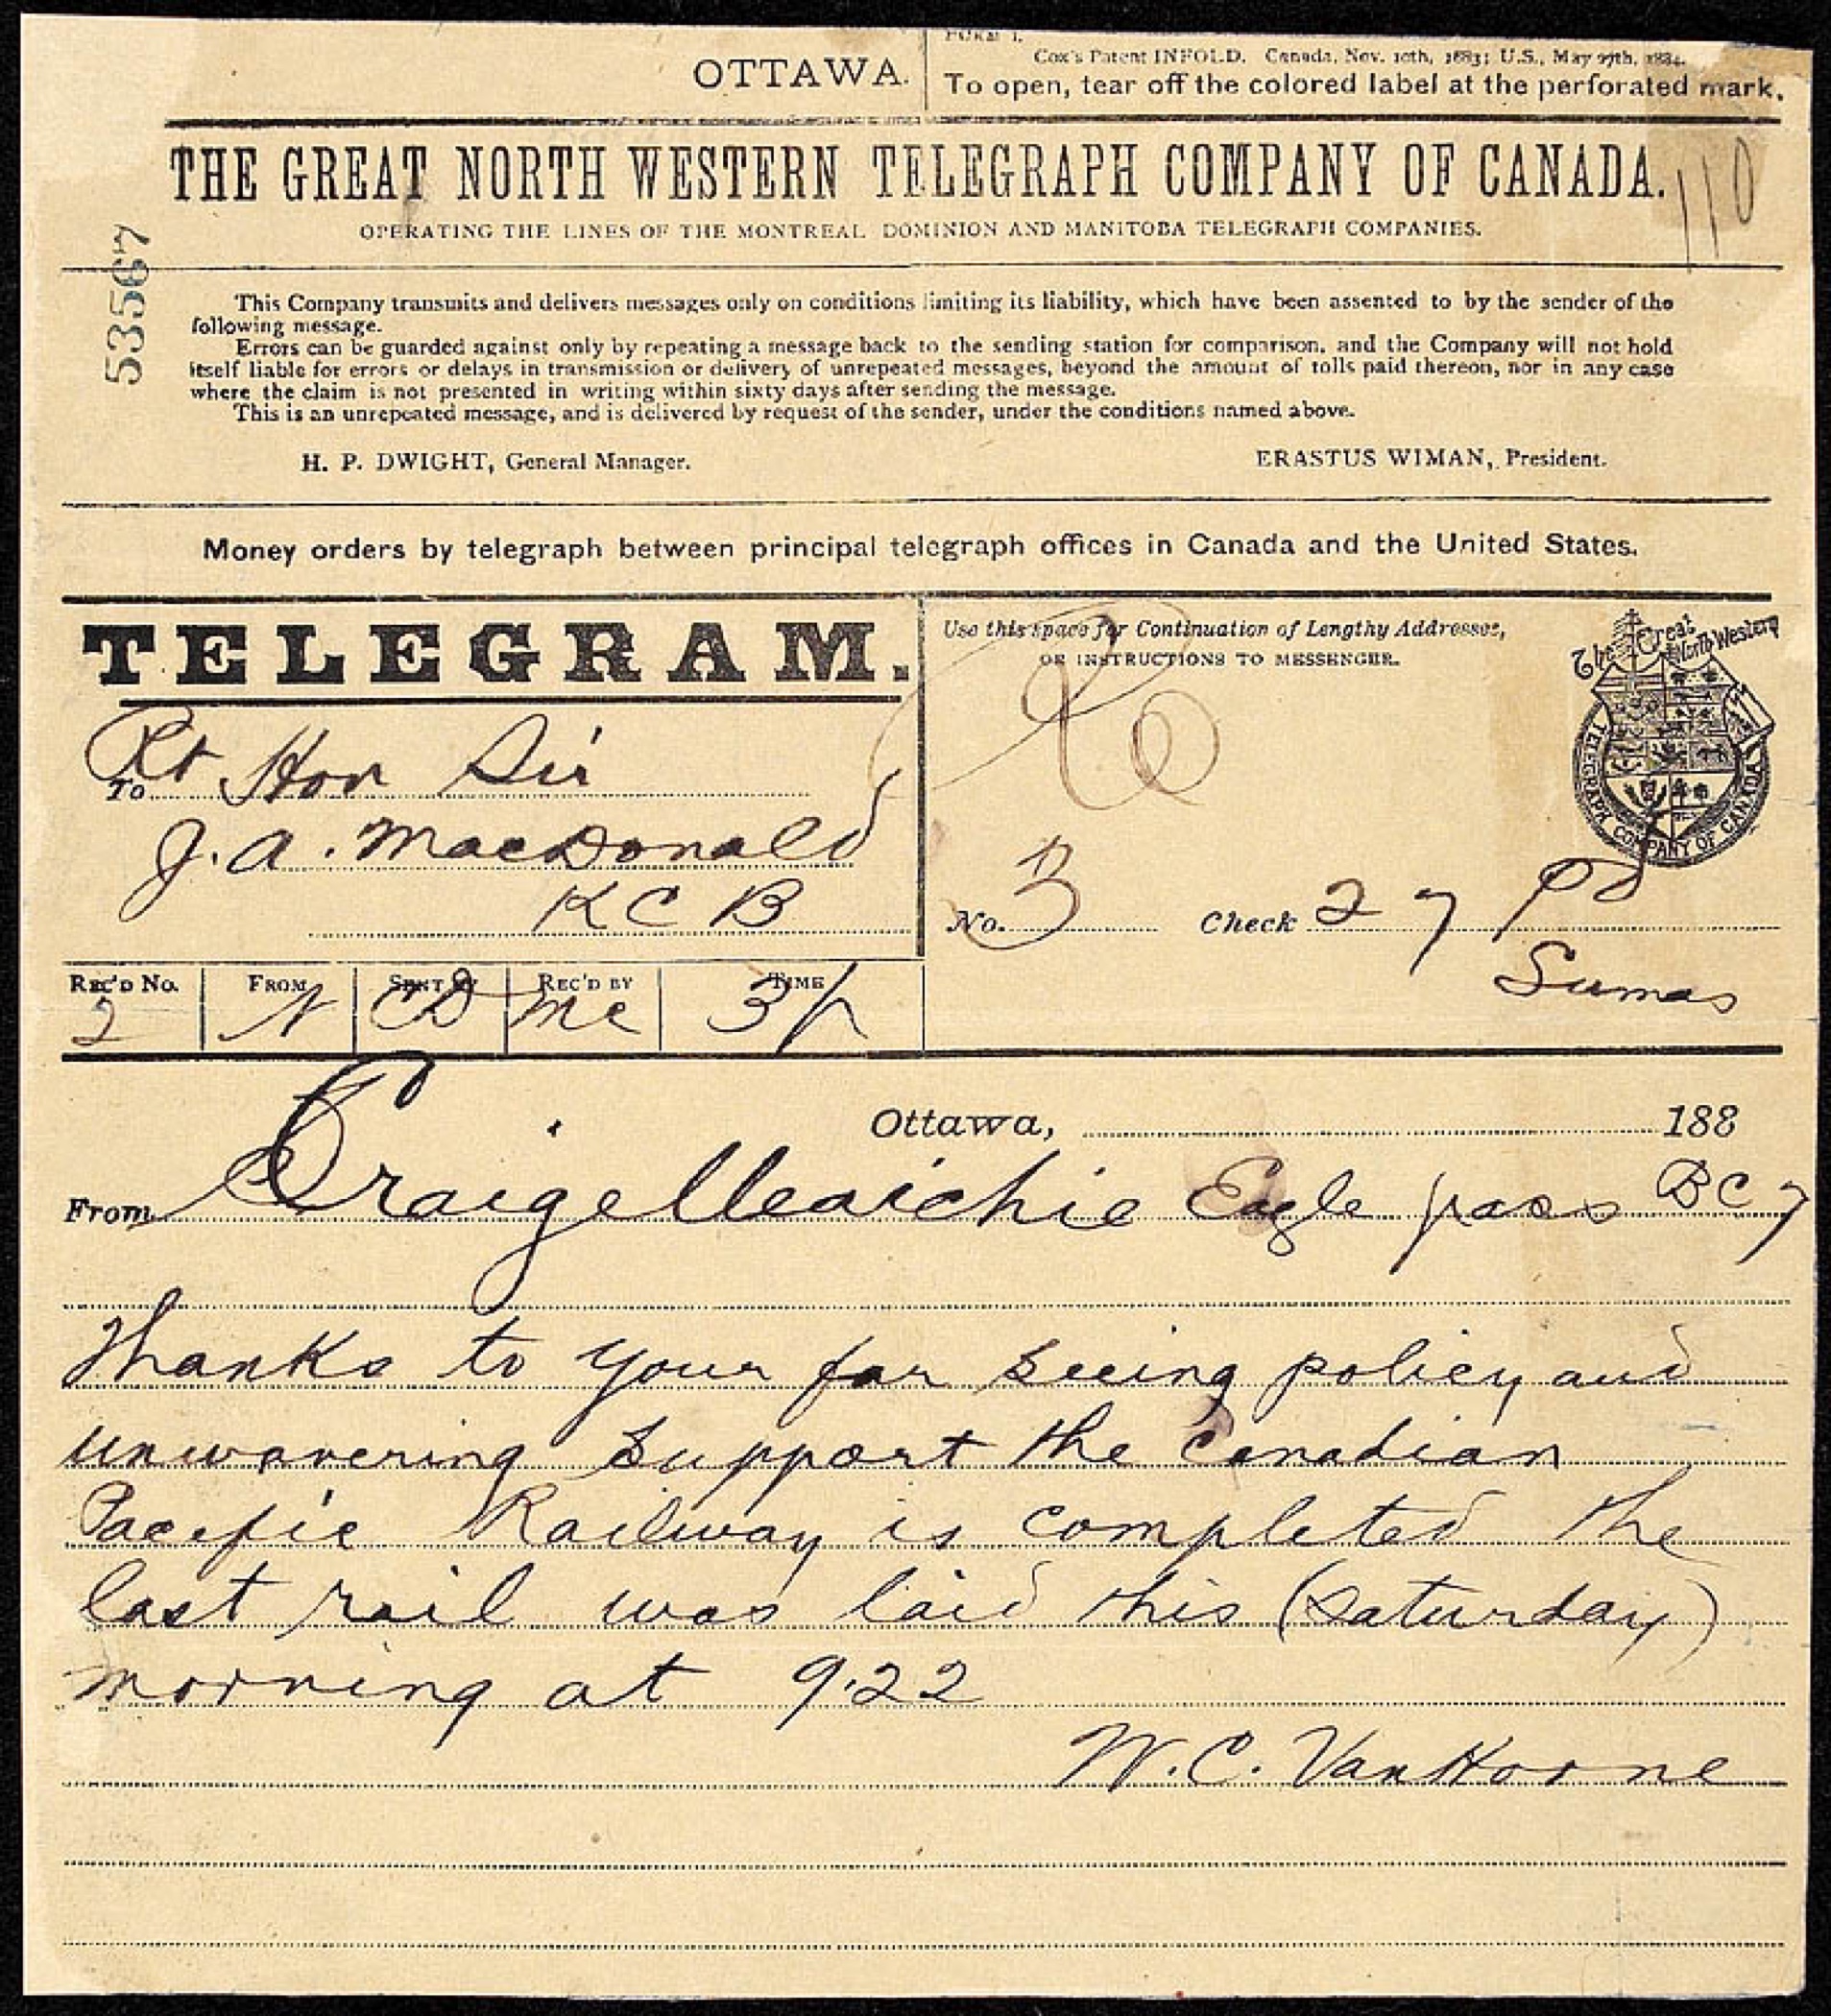 Telegram to Sir John A. Macdonald from Sir William Van Horne, announcing the completion of the Canadian Pacific Railroad.